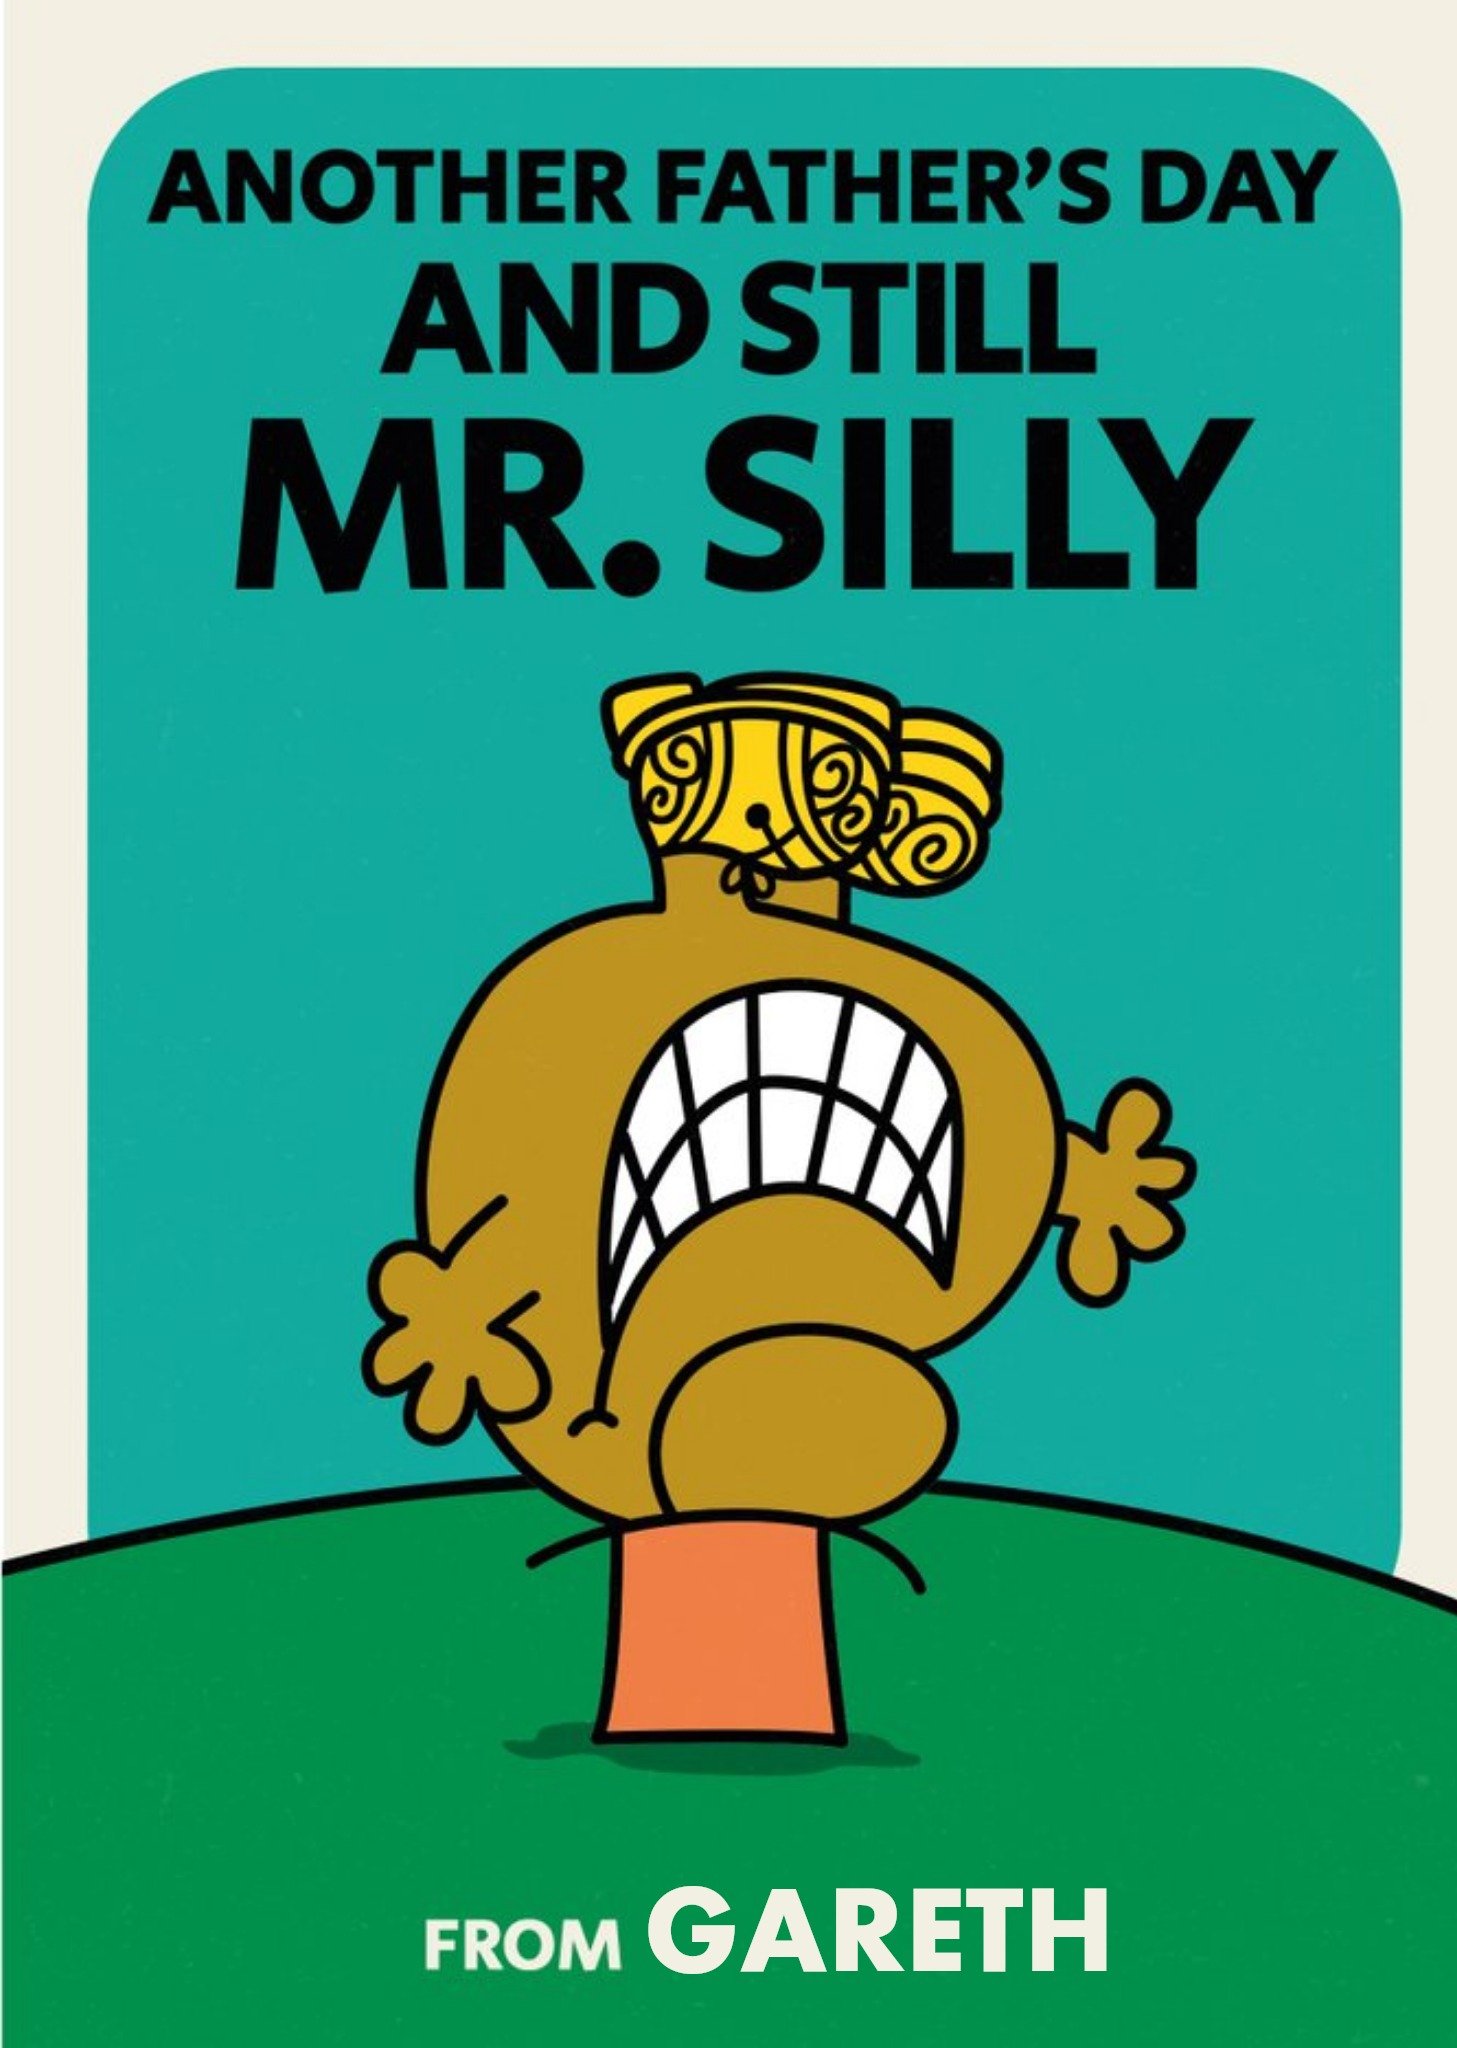 Another Fathers Day And Still Mr Silly Card Ecard